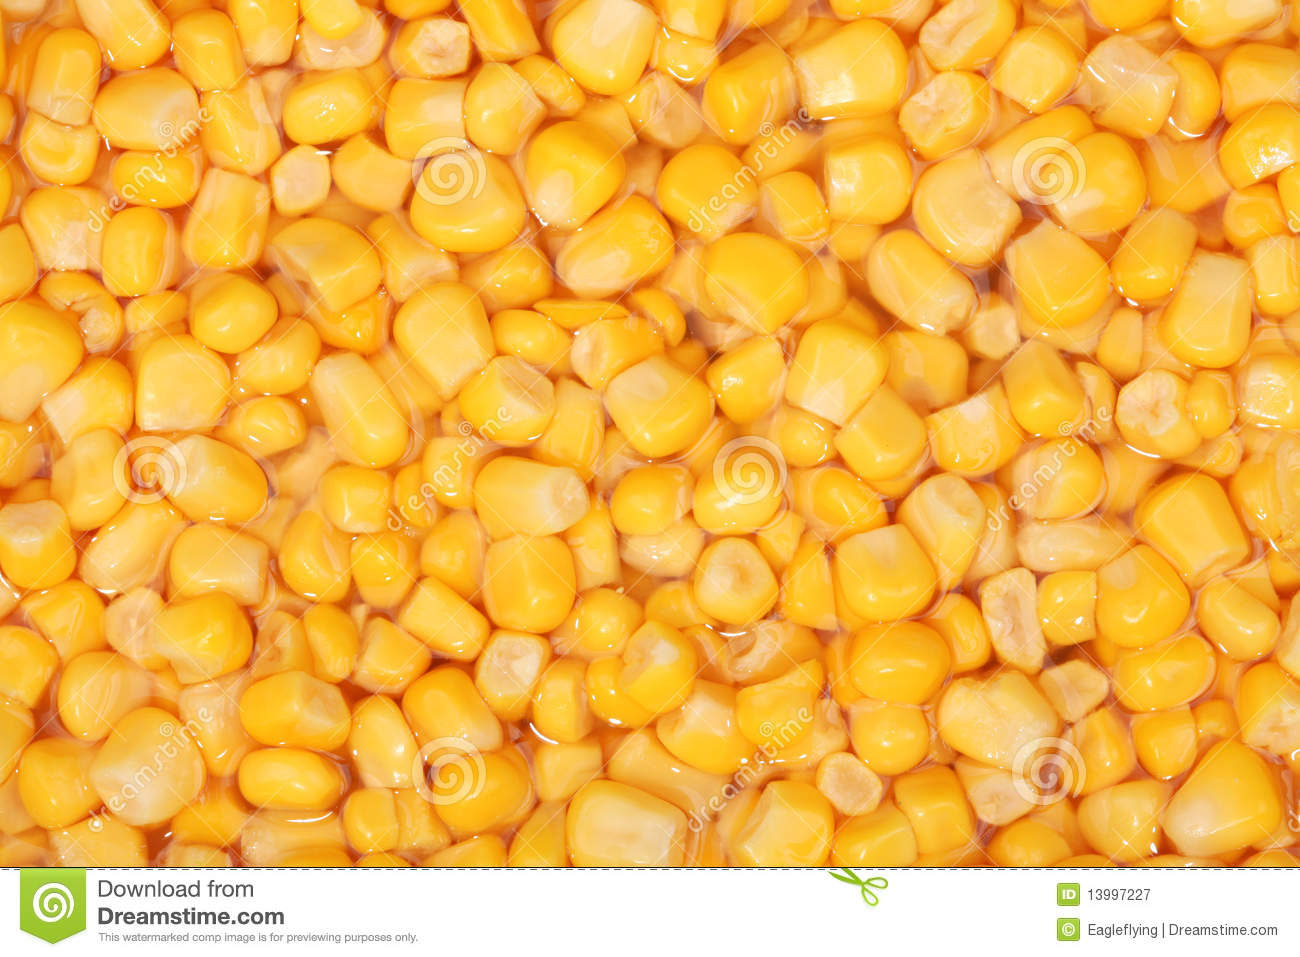 Tinned Whole Kernel Corn Background Royalty Free Stock Photography